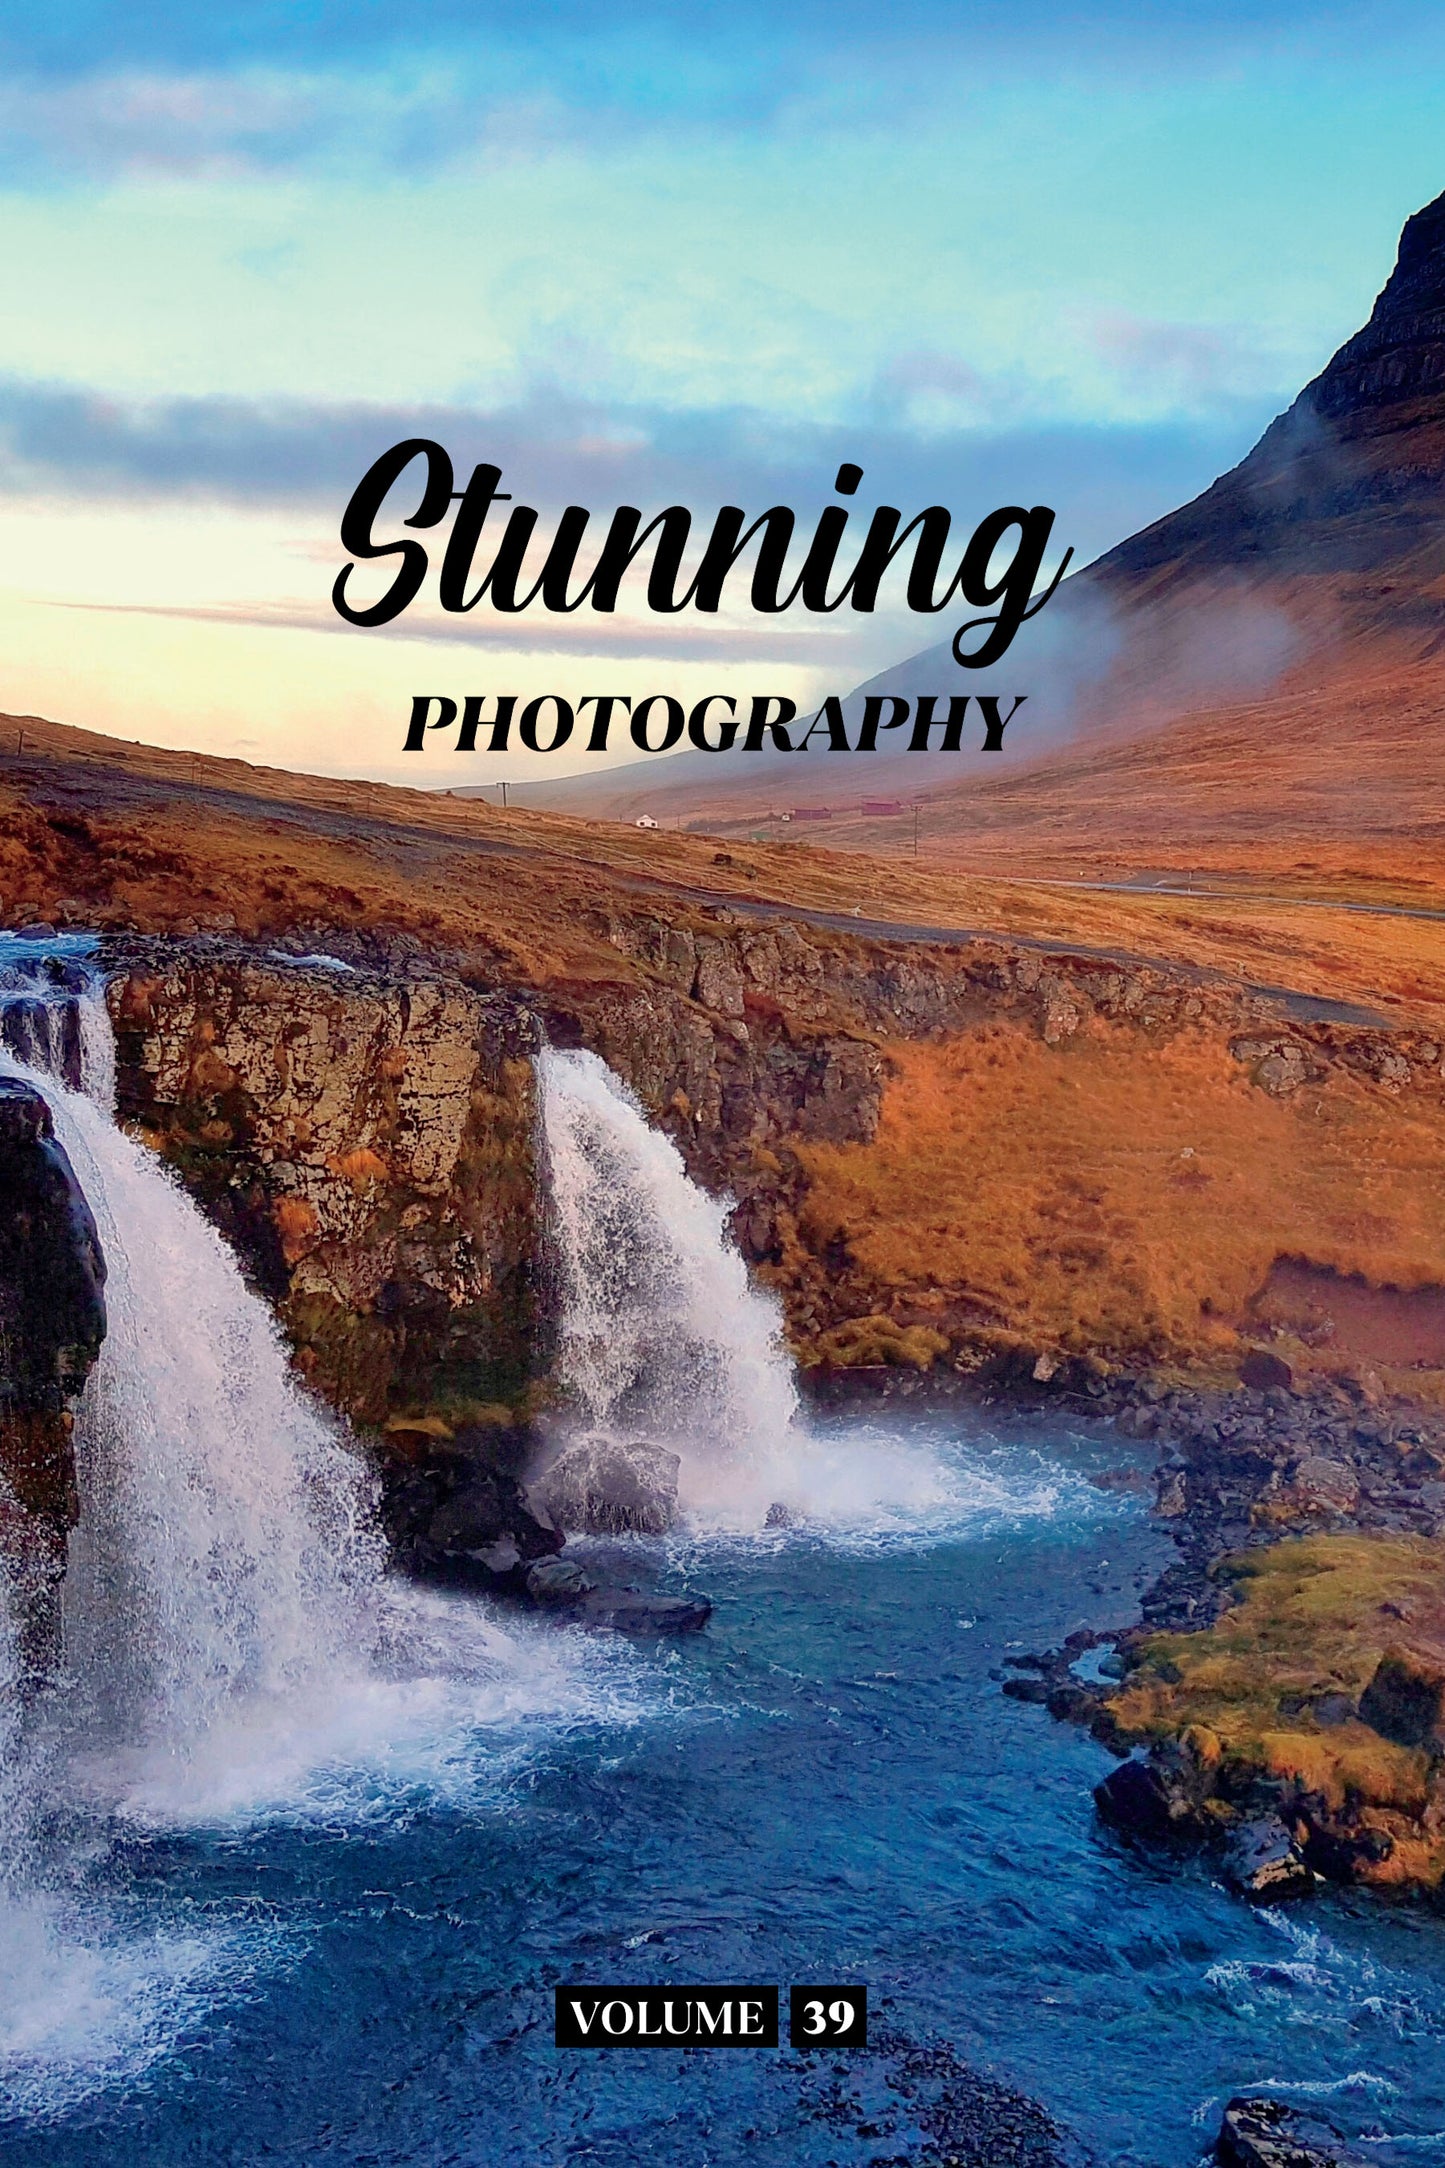 Stunning Photography Volume 39 (Physical Book Pre-Order)